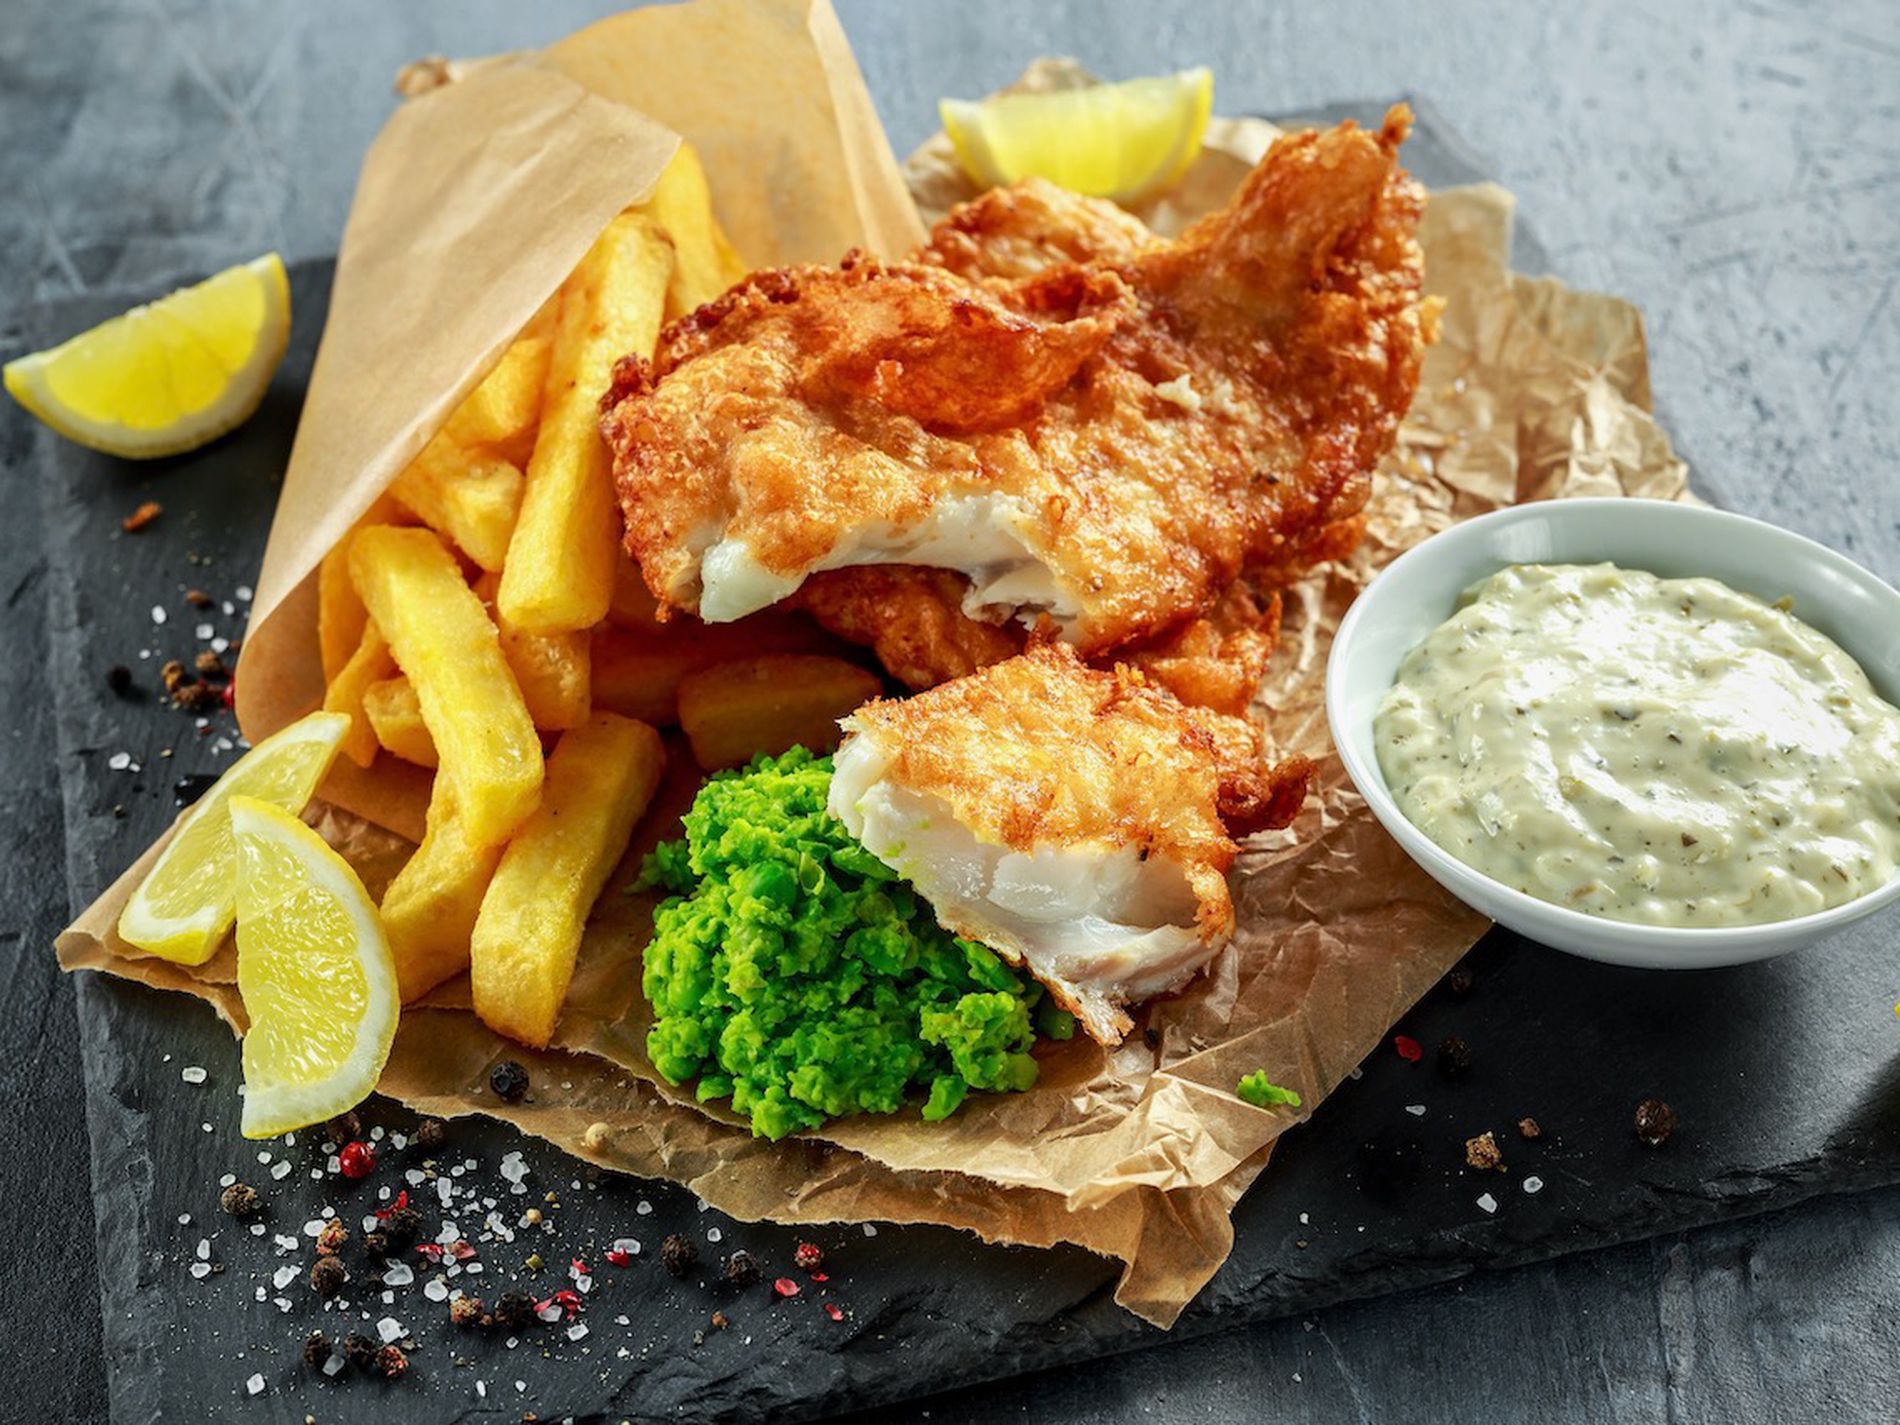 Popular Fish and Chips Takeaway for Sale
